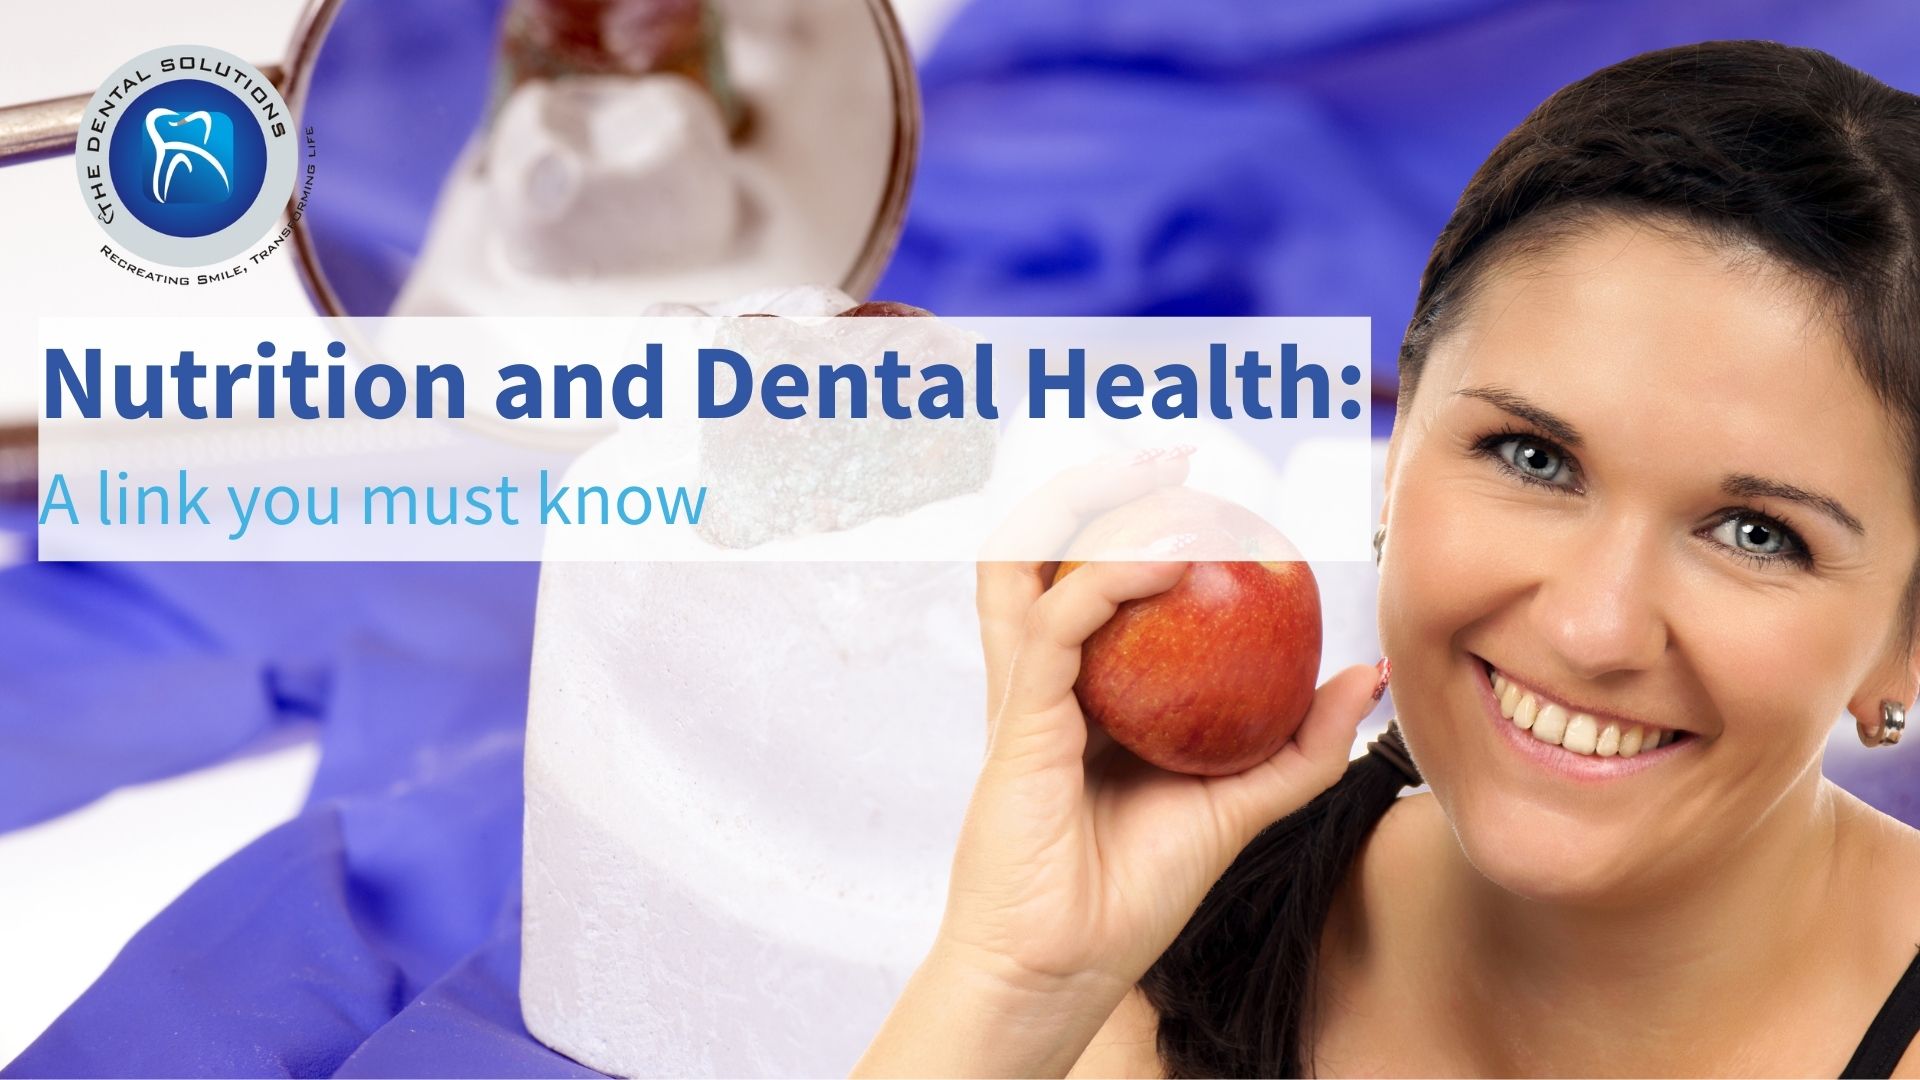 Nutrition and Dental Health: A link you must know